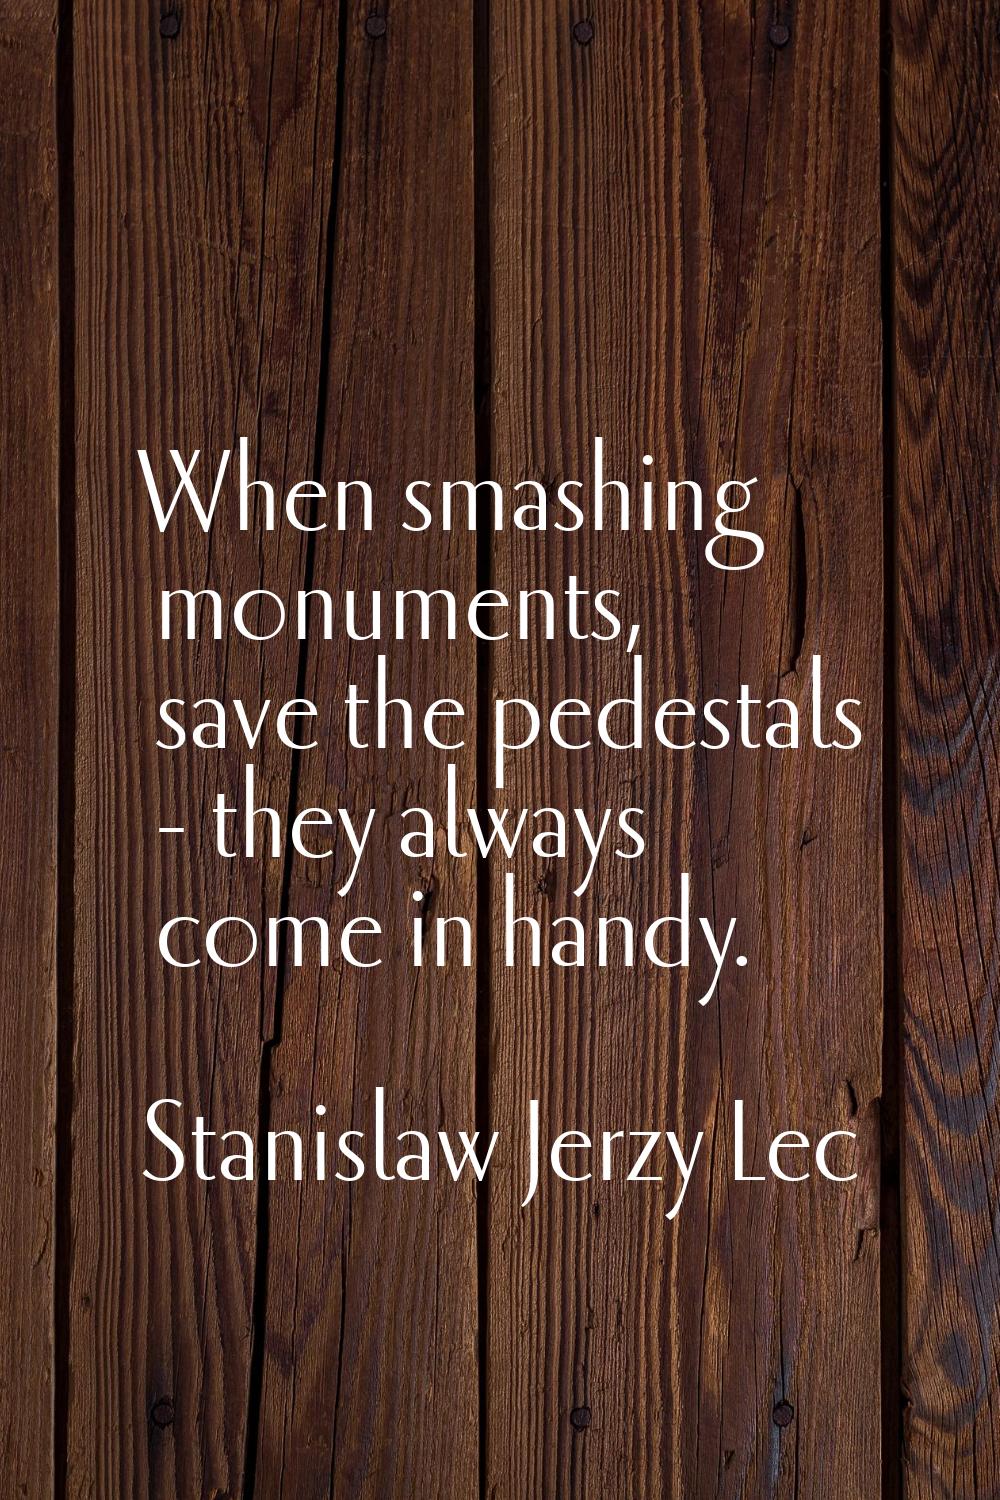 When smashing monuments, save the pedestals - they always come in handy.